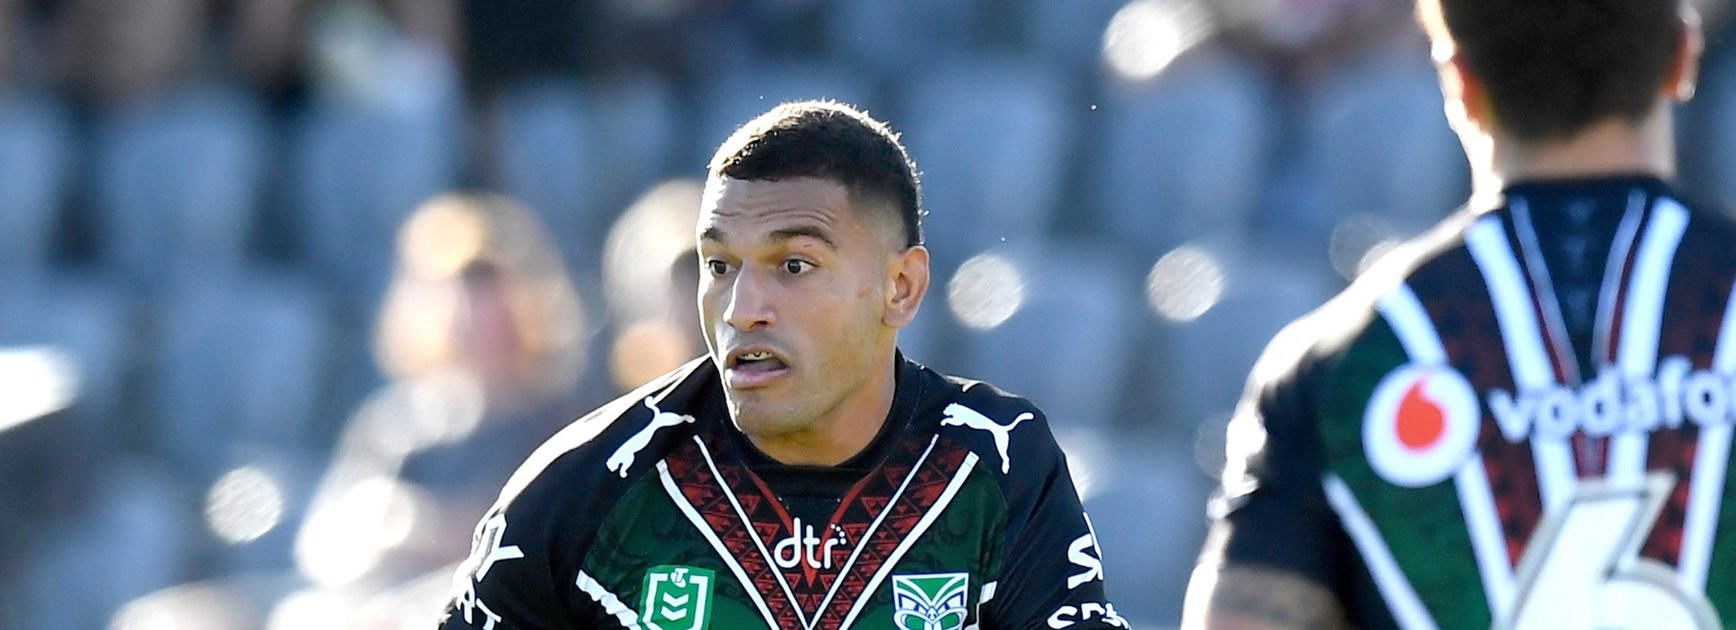 Judiciary Report: Rabbitohs youngster faces two-game ban